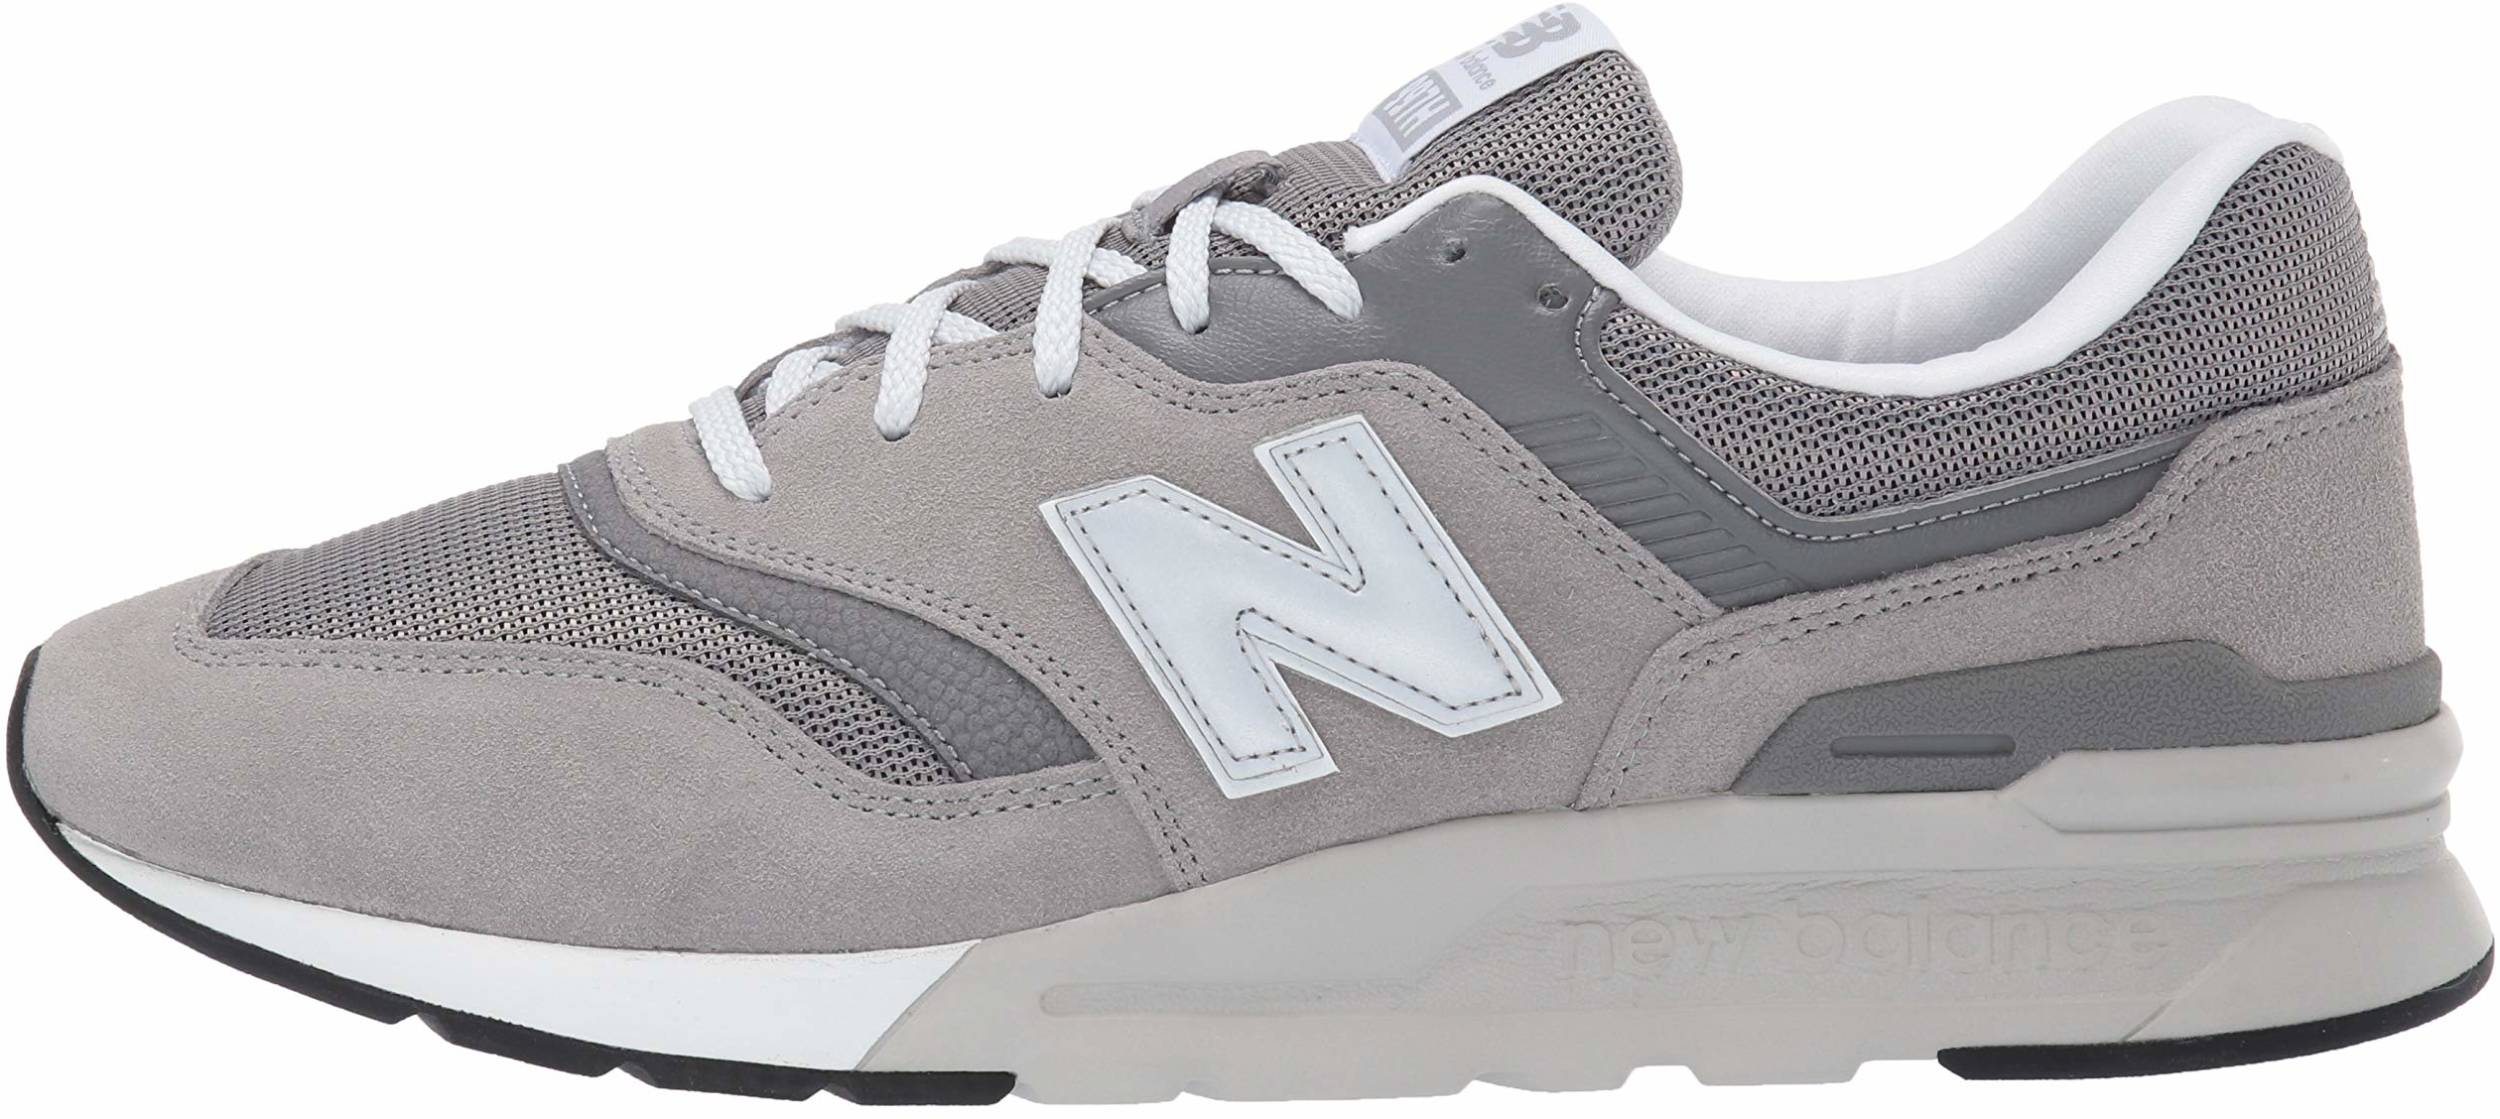 Rebellion concert approve 60+ colors of New Balance 997H (from $27) | RunRepeat